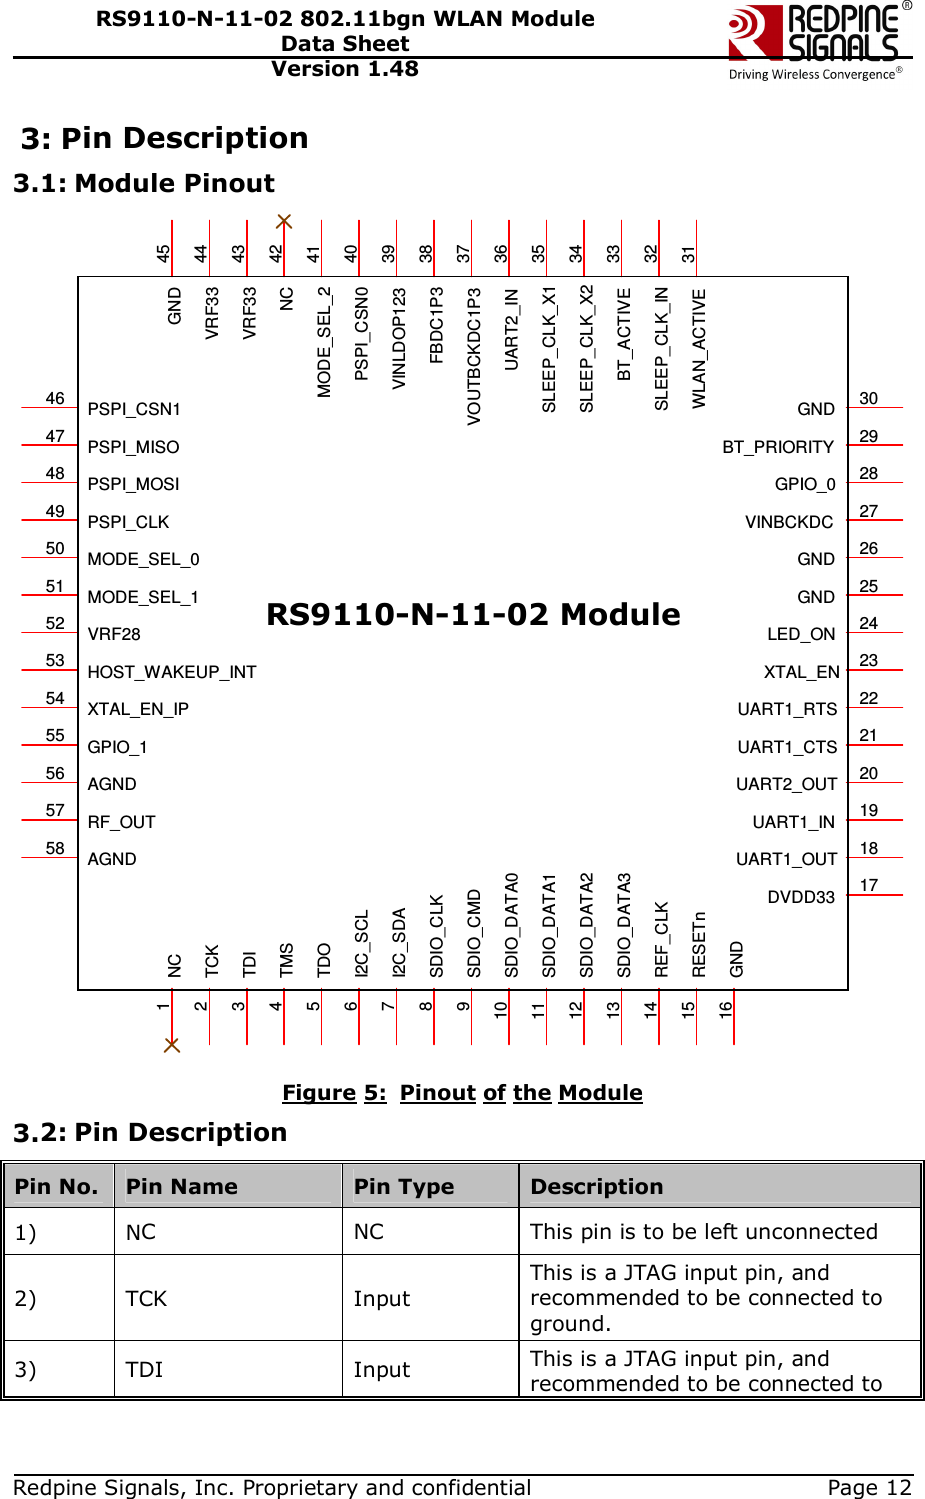   Redpine Signals, Inc. Proprietary and confidential  Page 12 RS9110-N-11-02 802.11bgn WLAN Module Data Sheet Version 1.48 3: Pin Description 3.1: Module Pinout AGND56RF_OUT57AGND58GND 25NC1DVDD33 17PSPI_CSN0 40LED_ON 24MODE_SEL_151VRF2852XTAL_EN 23REF_CLK14PSPI_CSN146SLEEP_CLK_X1 35SLEEP_CLK_X2 34I2C_SCL6I2C_SDA7GND 30GND 26RESETn15MODE_SEL_2 41WLAN_ACTIVE 31BT_PRIORITY 29SLEEP_CLK_IN 32HOST_WAKEUP_INT53NC 42VRF33 43VRF33 44SDIO_DATA313SDIO_DATA212SDIO_DATA111SDIO_DATA010SDIO_CMD9SDIO_CLK8GPIO_155GND16VINBCKDC 27VINLDOP123 39FBDC1P3 38VOUTBCKDC1P3 37UART2_IN 36UART1_RTS 22UART1_CTS 21UART1_OUT 18UART1_IN 19TCK2TDI3TMS4TDO5XTAL_EN_IP54GPIO_0 28BT_ACTIVE 33UART2_OUT 20PSPI_MISO47GND 45MODE_SEL_050PSPI_CLK49PSPI_MOSI48RS9110-N-11-02 Module  Figure 5:  Pinout of the Module 3.2: Pin Description Pin No.  Pin Name  Pin Type   Description 1)   NC  NC  This pin is to be left unconnected 2)   TCK  Input This is a JTAG input pin, and recommended to be connected to ground. 3)   TDI  Input  This is a JTAG input pin, and recommended to be connected to 